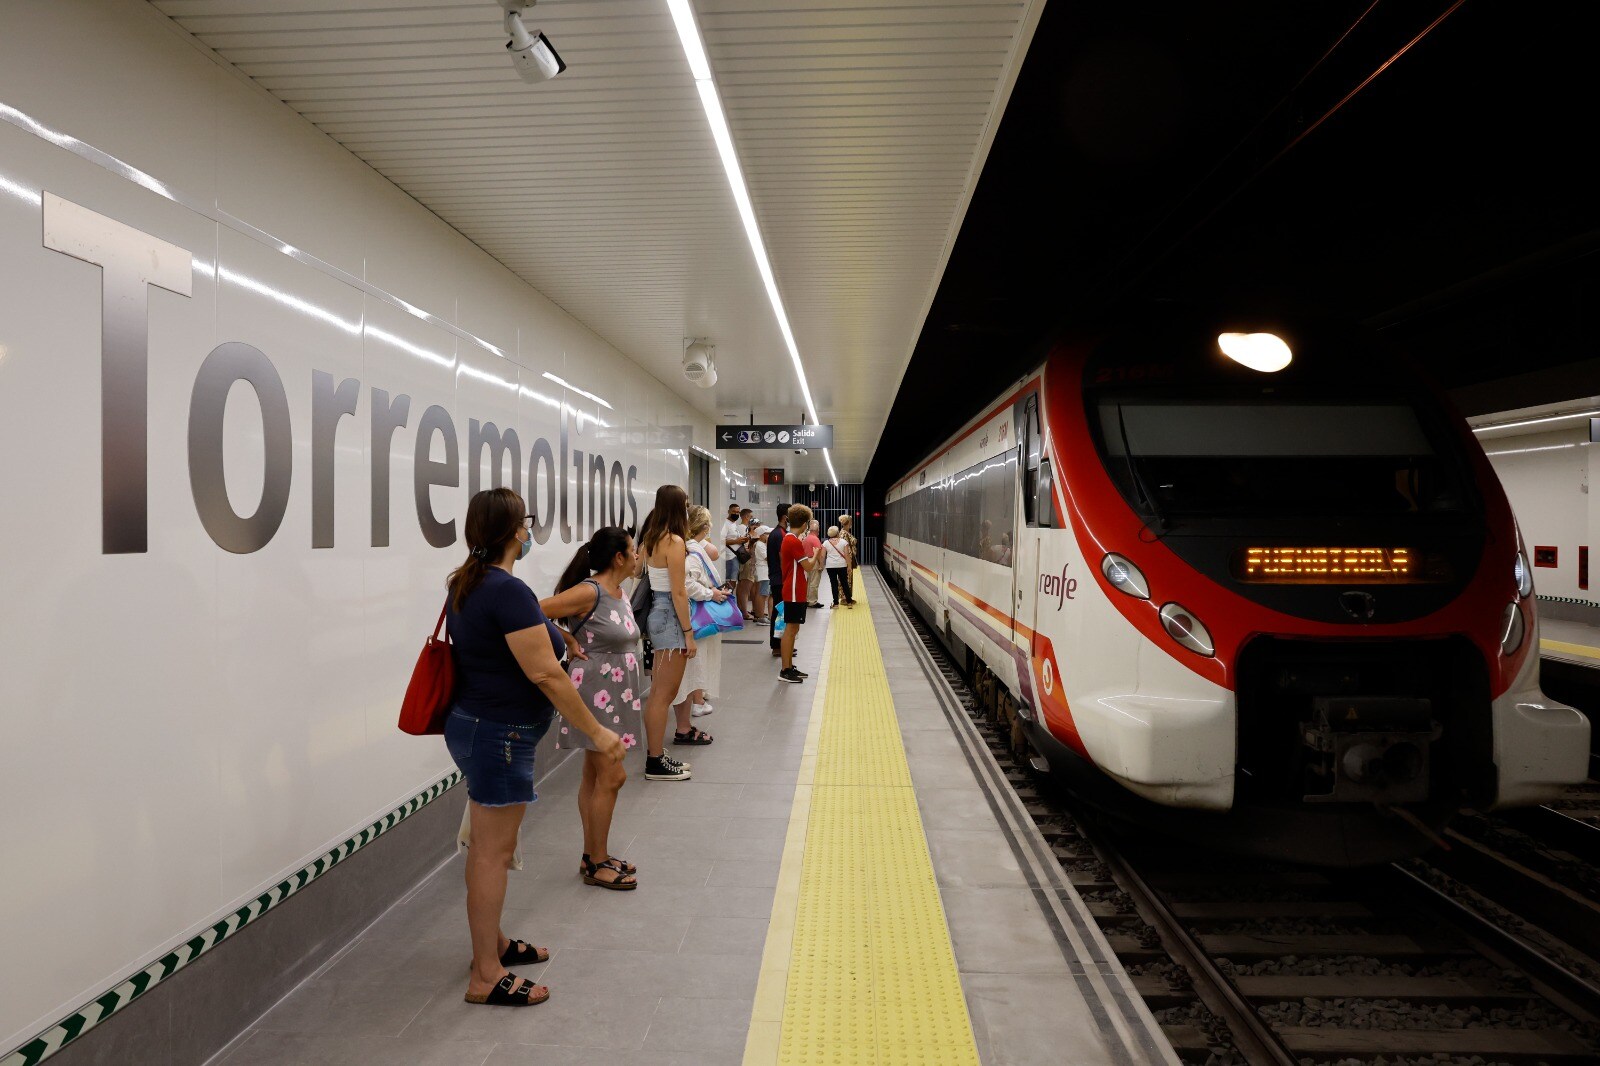 The remodelled La Nogalera train station in Torremolinos is officially opened, at a cost of seven million euros